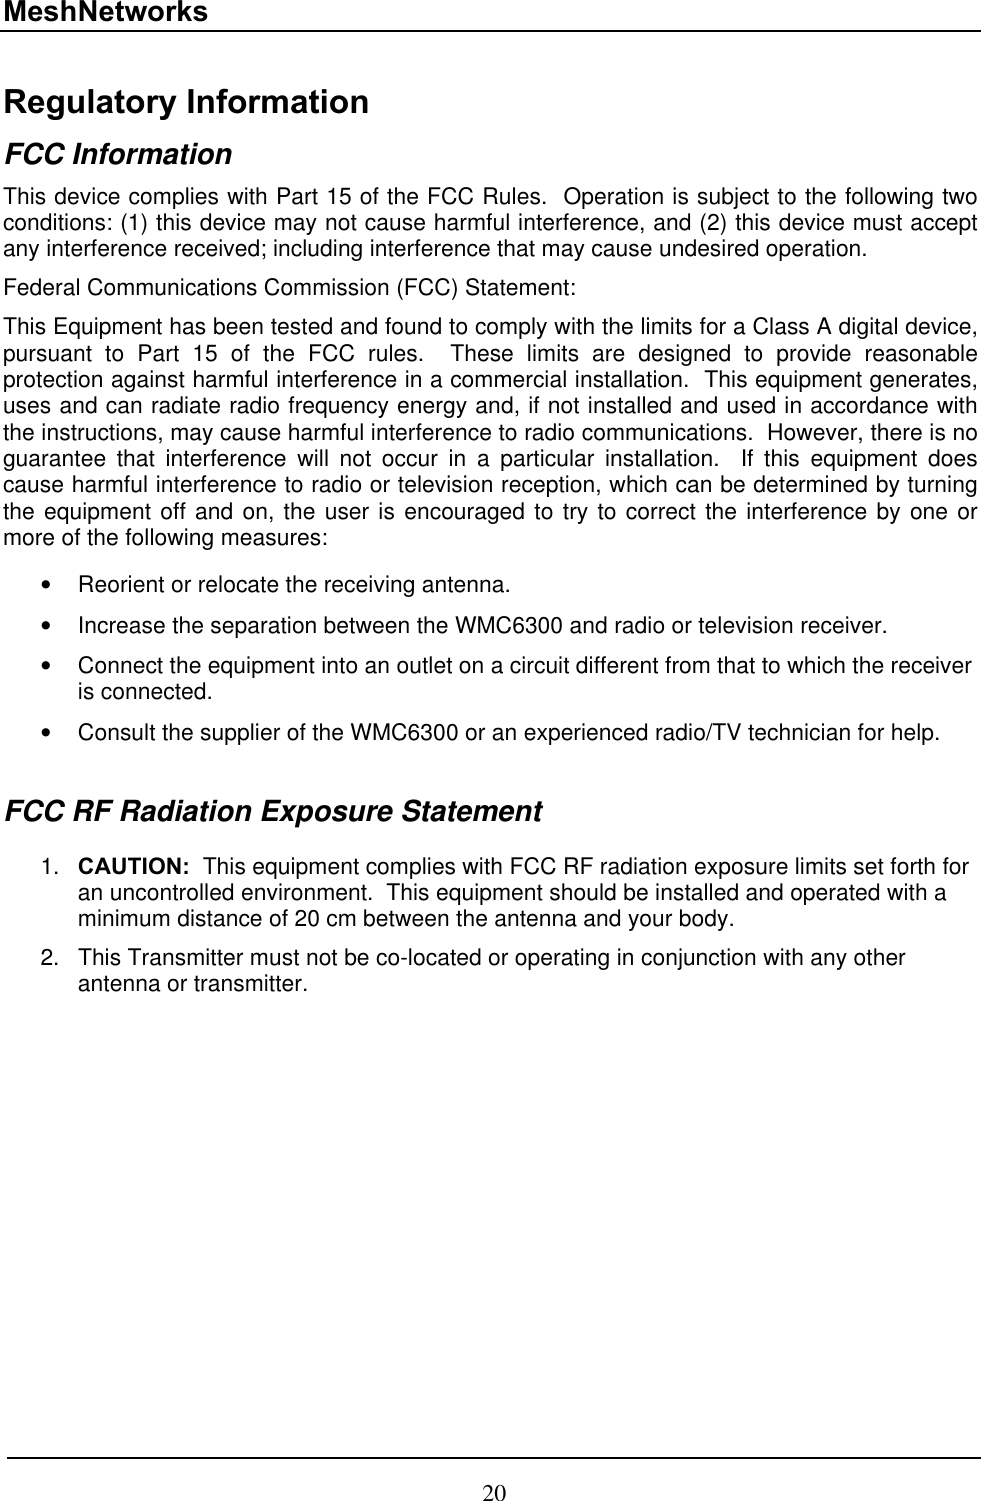 MeshNetworks Regulatory Information FCC Information This device complies with Part 15 of the FCC Rules.  Operation is subject to the following two conditions: (1) this device may not cause harmful interference, and (2) this device must accept any interference received; including interference that may cause undesired operation. Federal Communications Commission (FCC) Statement: This Equipment has been tested and found to comply with the limits for a Class A digital device, pursuant to Part 15 of the FCC rules.  These limits are designed to provide reasonable protection against harmful interference in a commercial installation.  This equipment generates, uses and can radiate radio frequency energy and, if not installed and used in accordance with the instructions, may cause harmful interference to radio communications.  However, there is no guarantee that interference will not occur in a particular installation.  If this equipment does cause harmful interference to radio or television reception, which can be determined by turning the equipment off and on, the user is encouraged to try to correct the interference by one or more of the following measures:   •  Reorient or relocate the receiving antenna. •  Increase the separation between the WMC6300 and radio or television receiver. •  Connect the equipment into an outlet on a circuit different from that to which the receiver is connected.  •  Consult the supplier of the WMC6300 or an experienced radio/TV technician for help.  FCC RF Radiation Exposure Statement  CAUTION:  This equipment complies with FCC RF radiation exposure limits set forth for an uncontrolled environment.  This equipment should be installed and operated with a minimum distance of 20 cm between the antenna and your body. 1. 2.  This Transmitter must not be co-located or operating in conjunction with any other antenna or transmitter. 7 20 